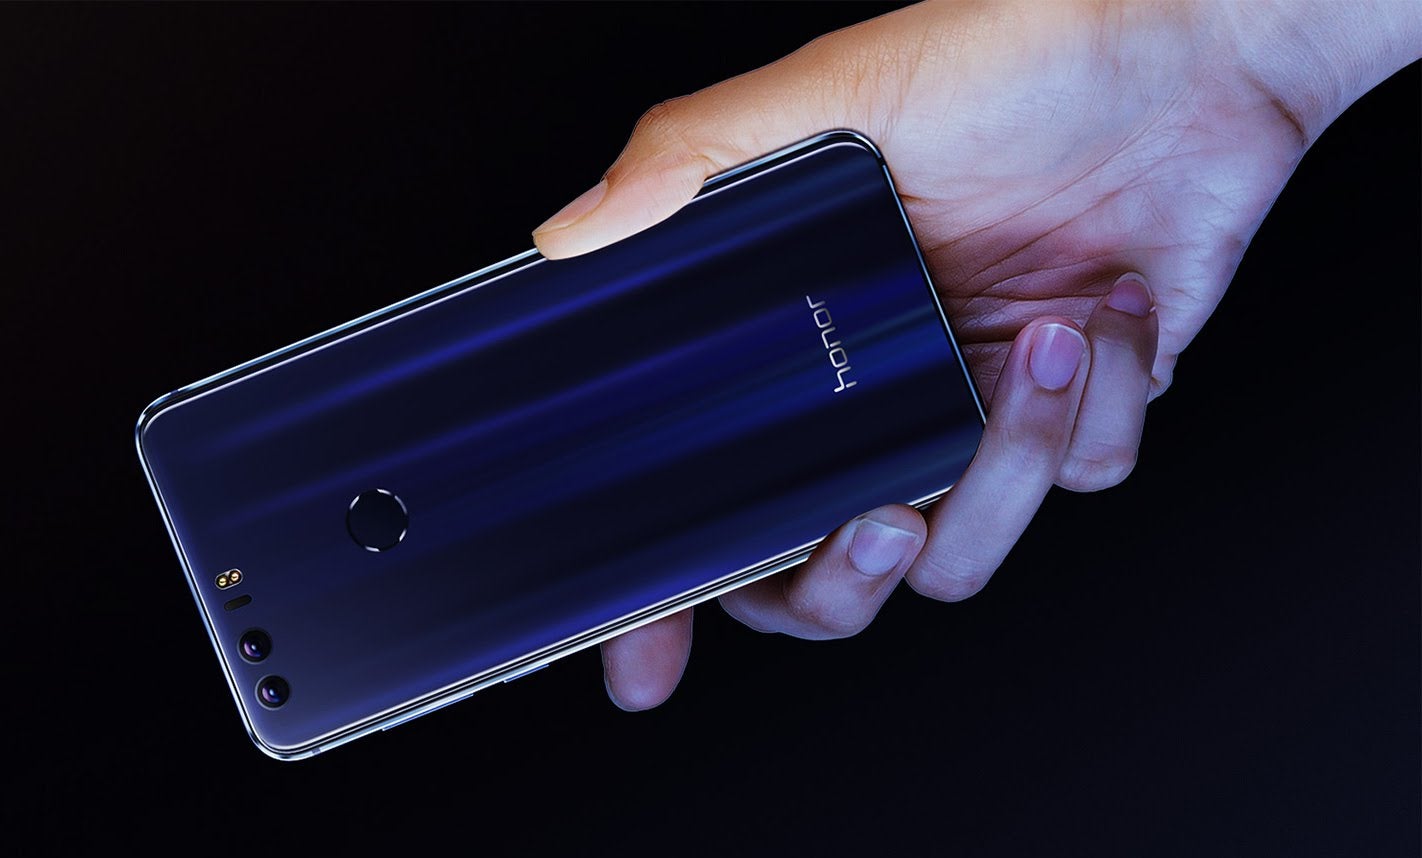 A new concept smartphone from Honor will be announced on December 7